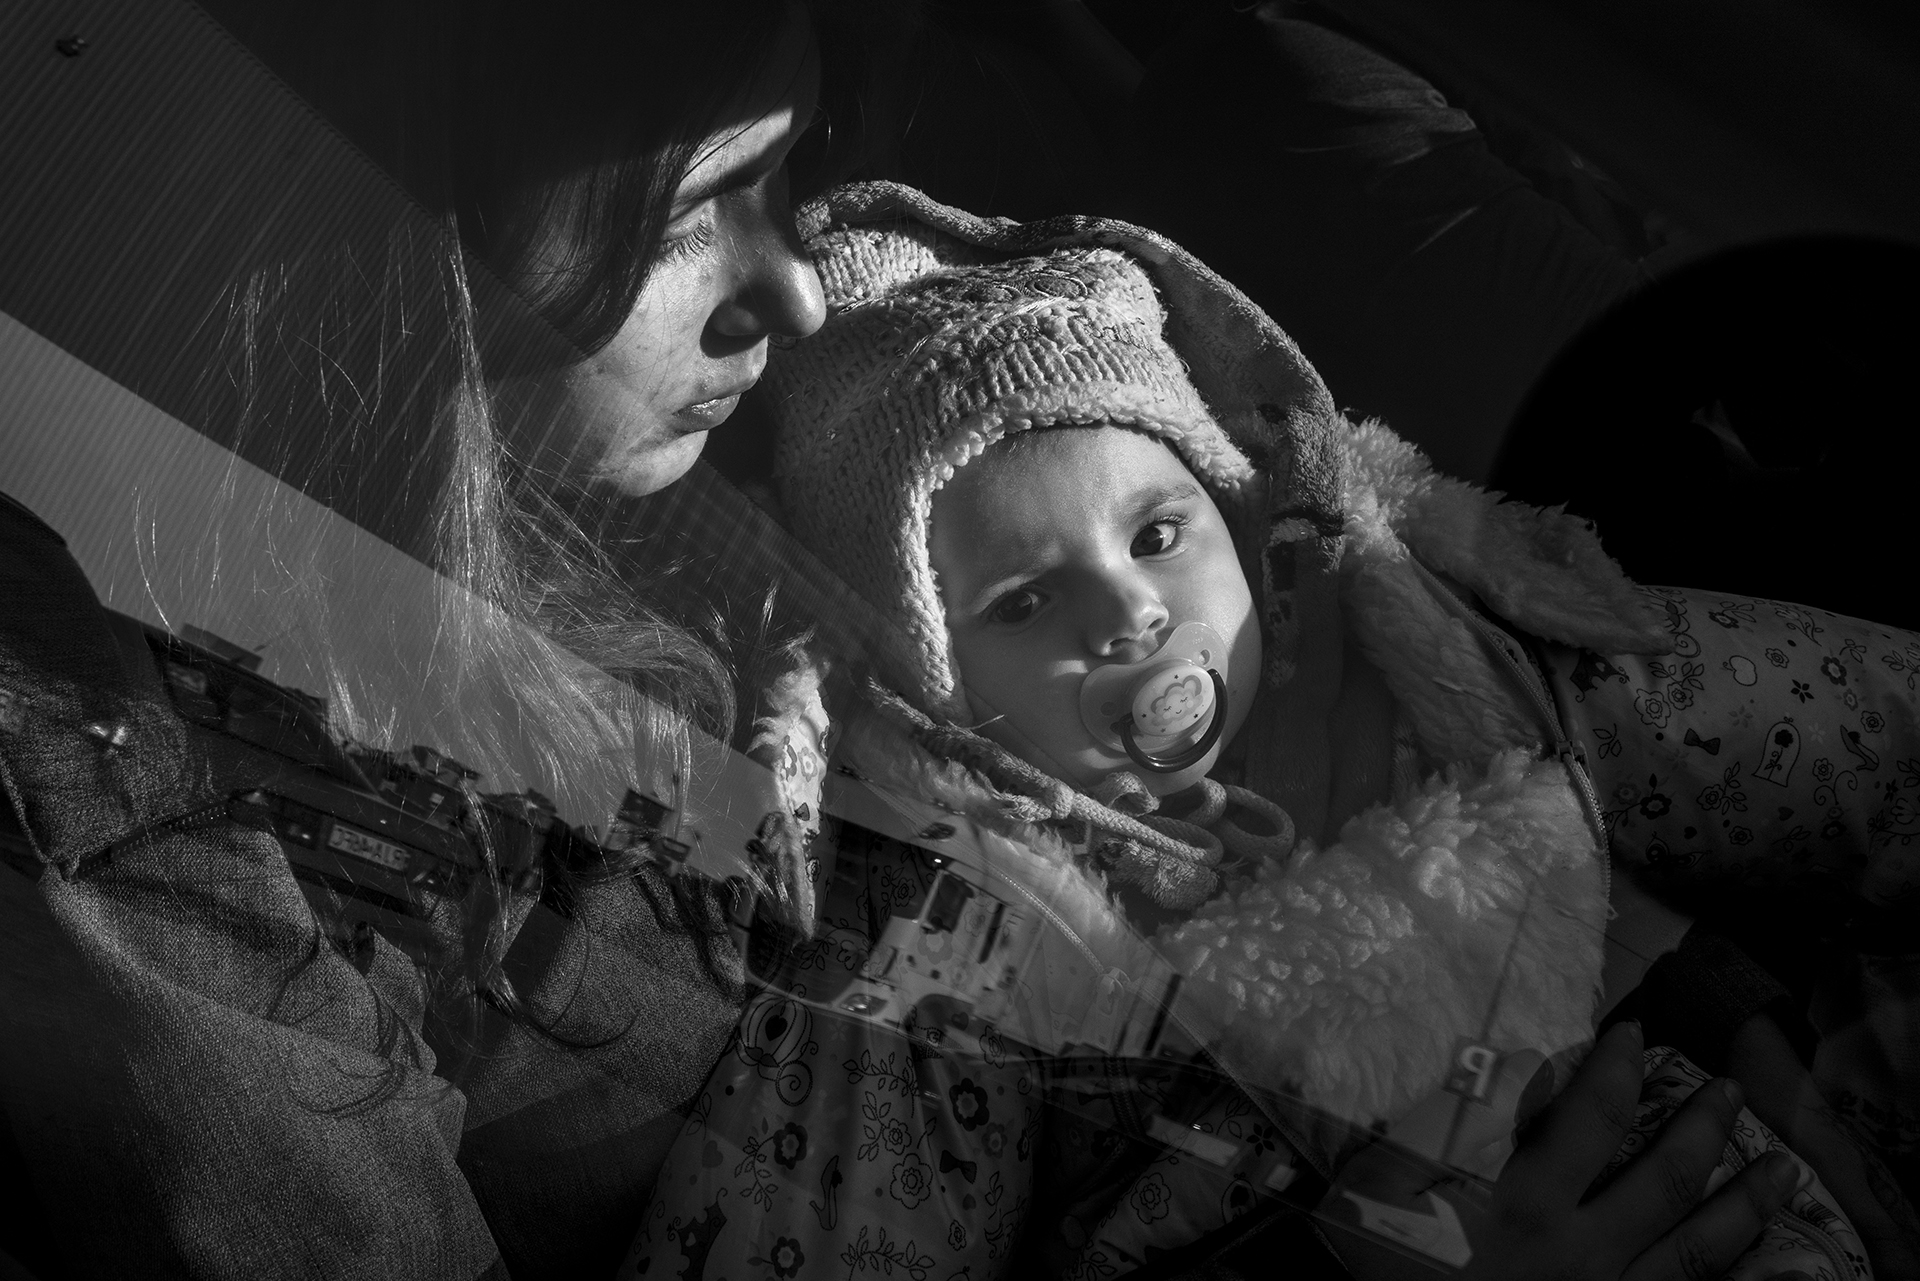 Photo by Joachim Ladefoged / VII. A refugee center in Hala Kijowska, Poland, on March 17, 2022. 24-year-old Angelika from Okhtyrka in eastern Ukraine holds her 10-month-old daughter Darina. They are getting a ride in the car of Polish volunteer Sandra, an insurance broker from Krakow, who has been driving to the border as often as she can to help transport refugees.